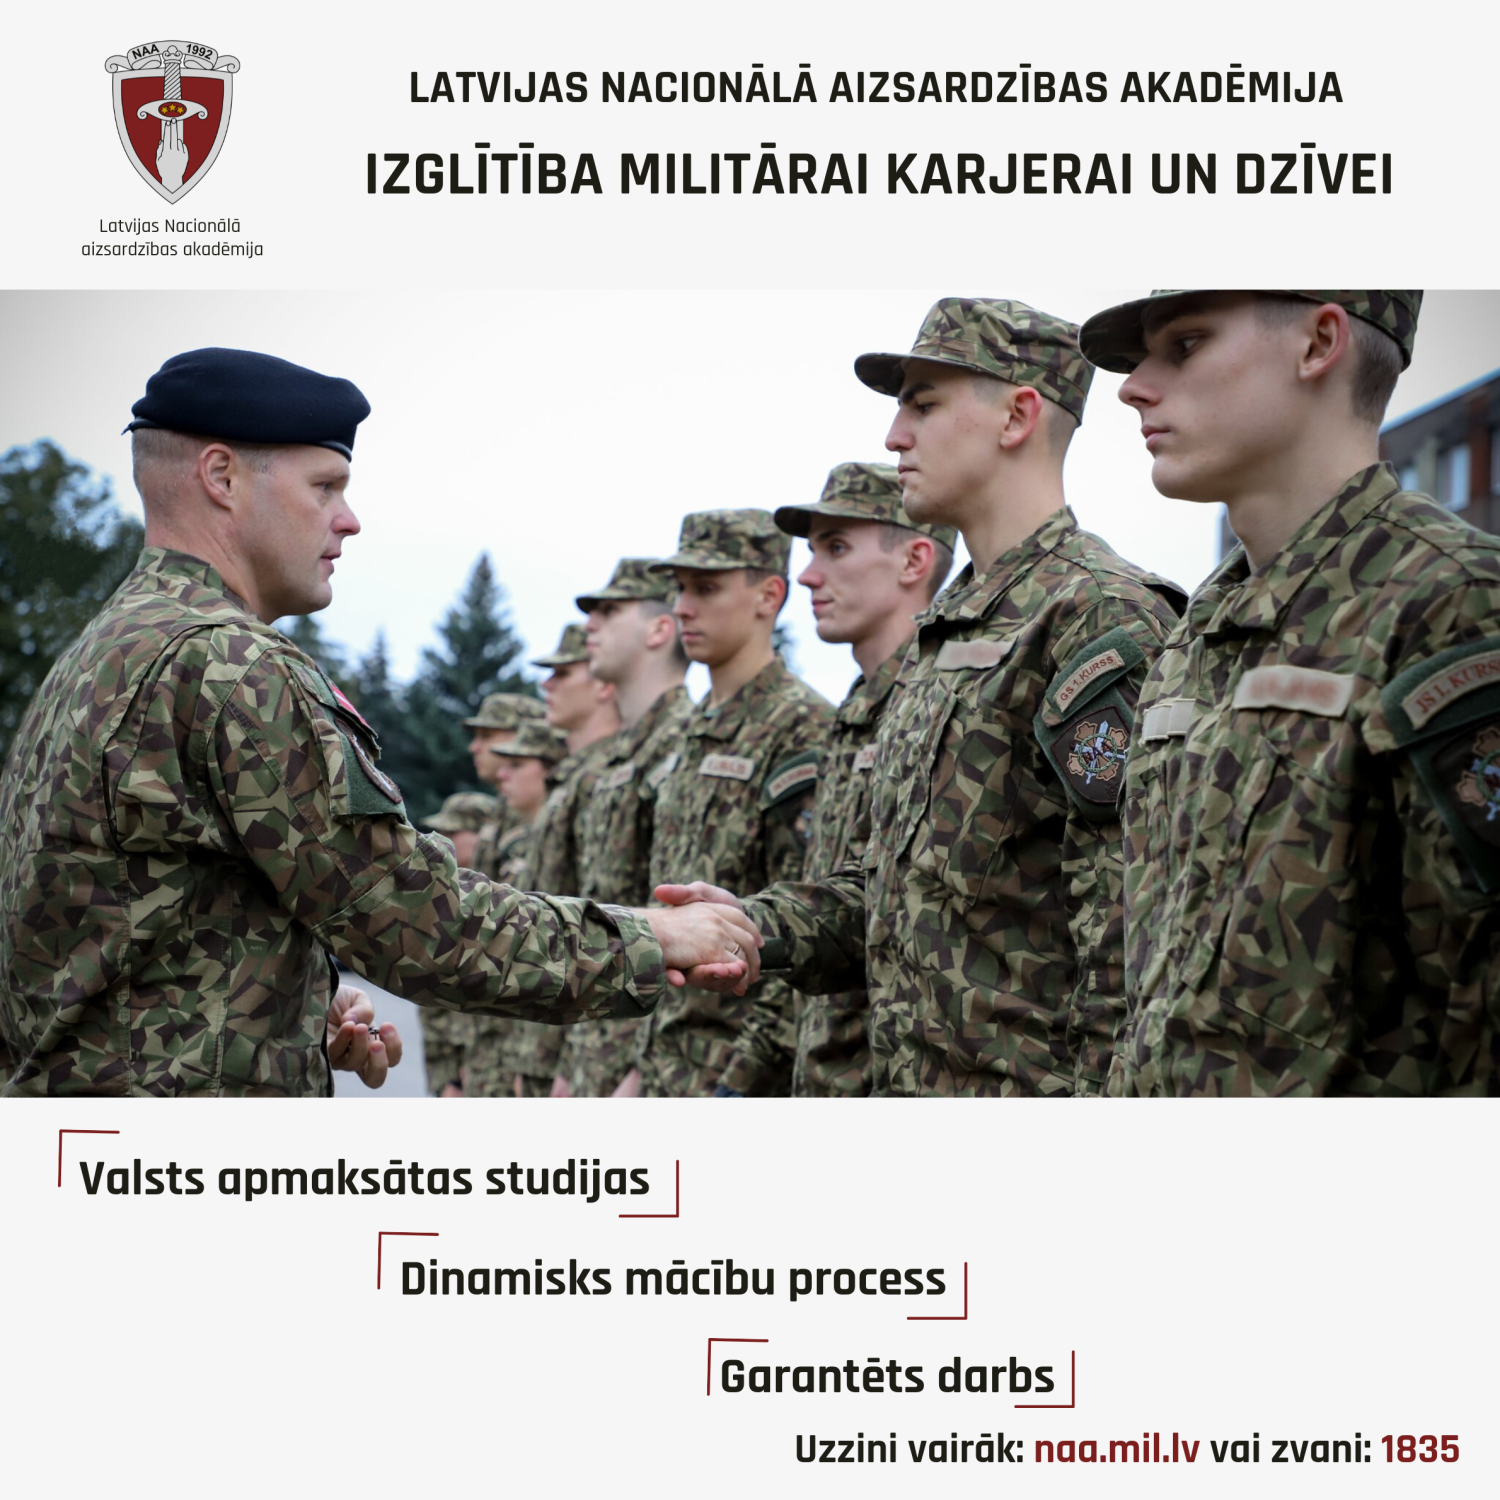 Apply for studies at the National Defence Academy of Latvia!